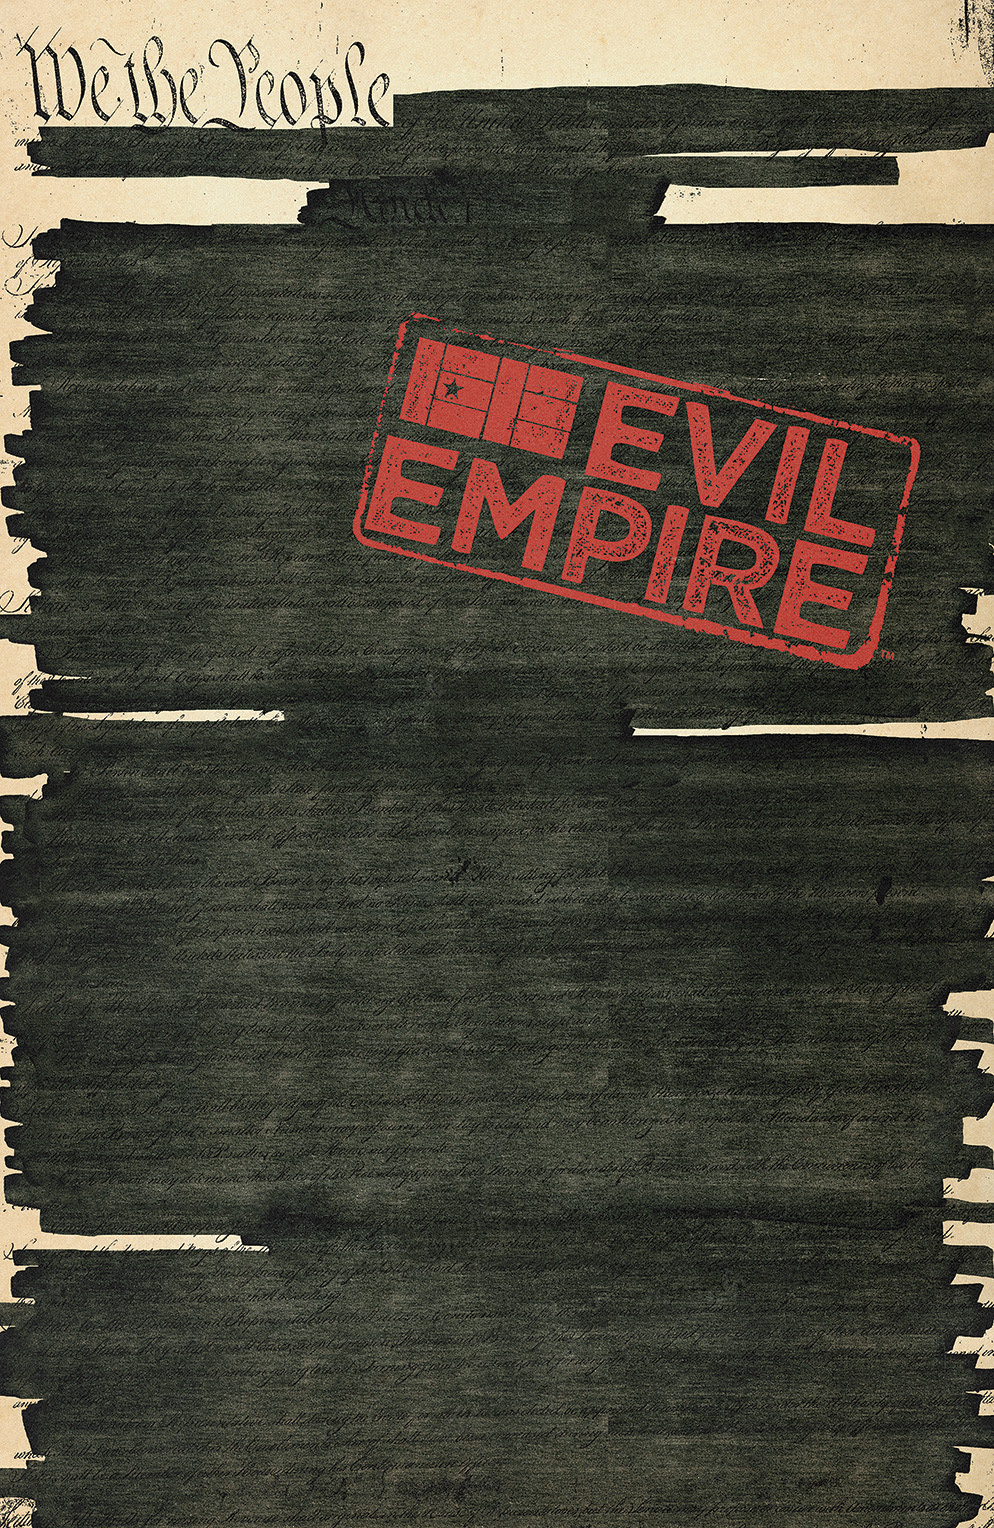 EVIL EMPIRE #6 Cover by Jay Shaw